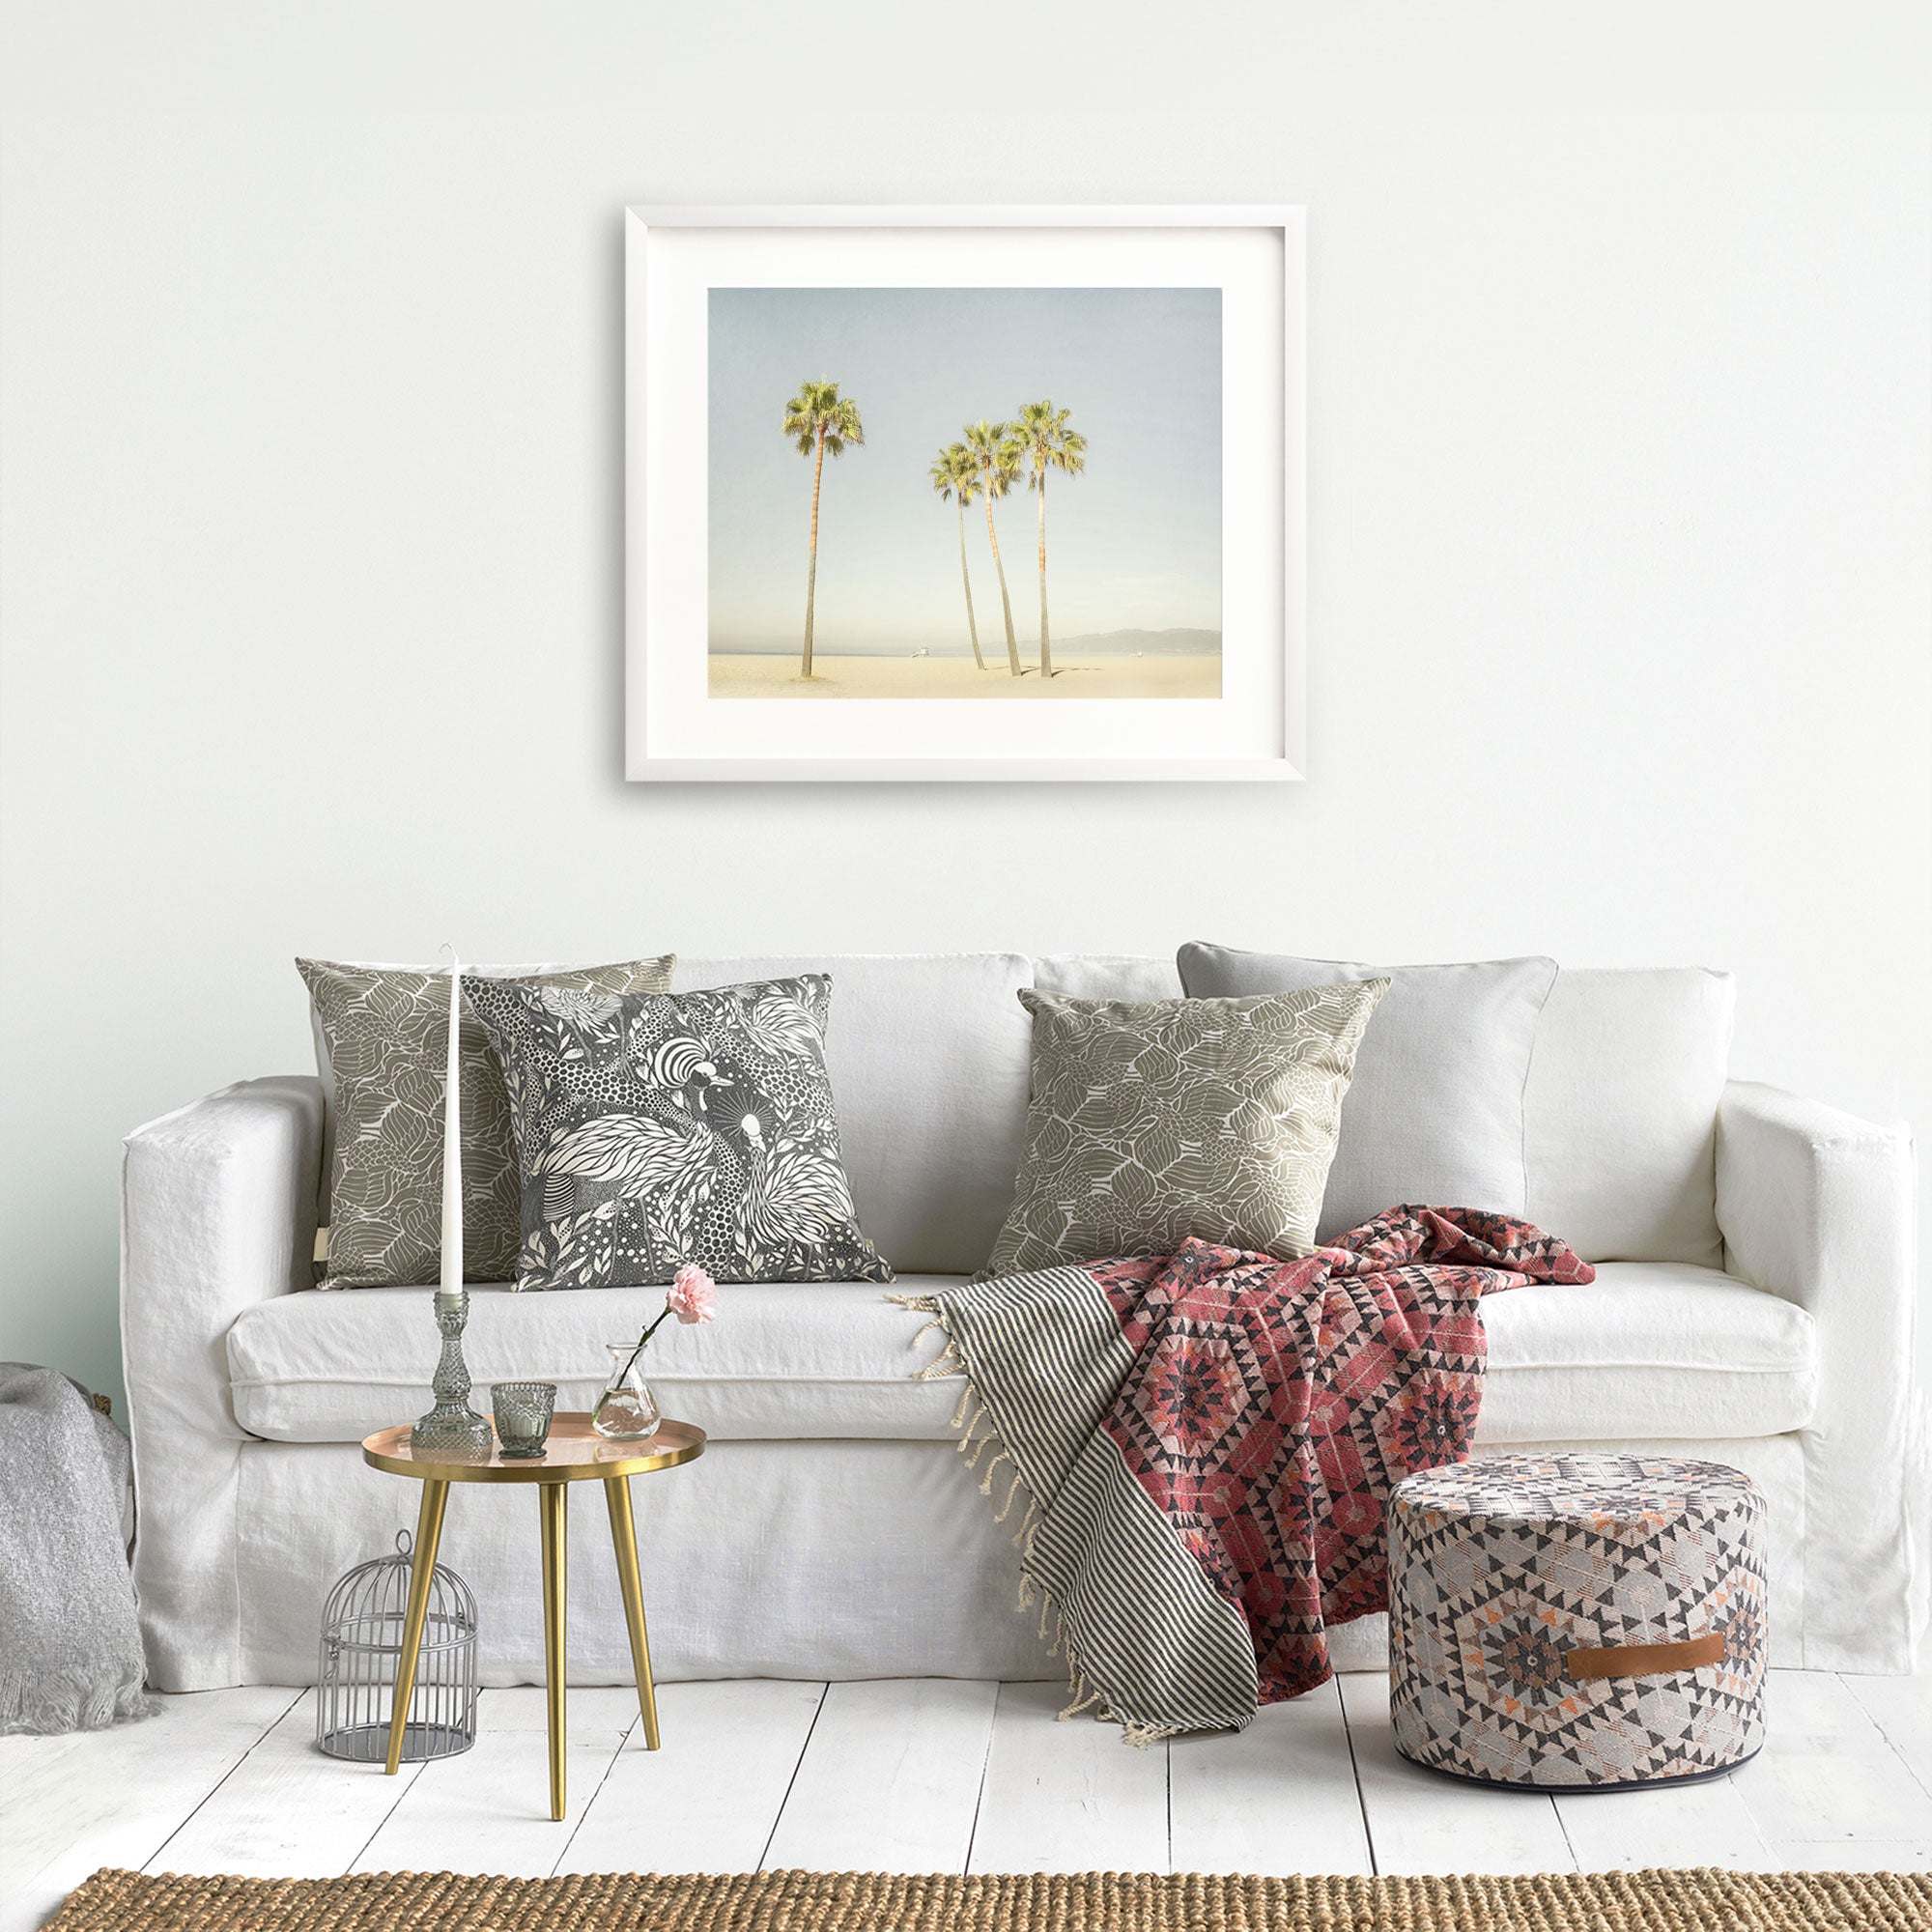 A cozy living room scene with a white sofa adorned with patterned cushions, a red patterned throw, a small round table with decor items, a woven pouf, and an Offley Green 'California Venice Beach Print, Boardwalk Palms' unframed print.